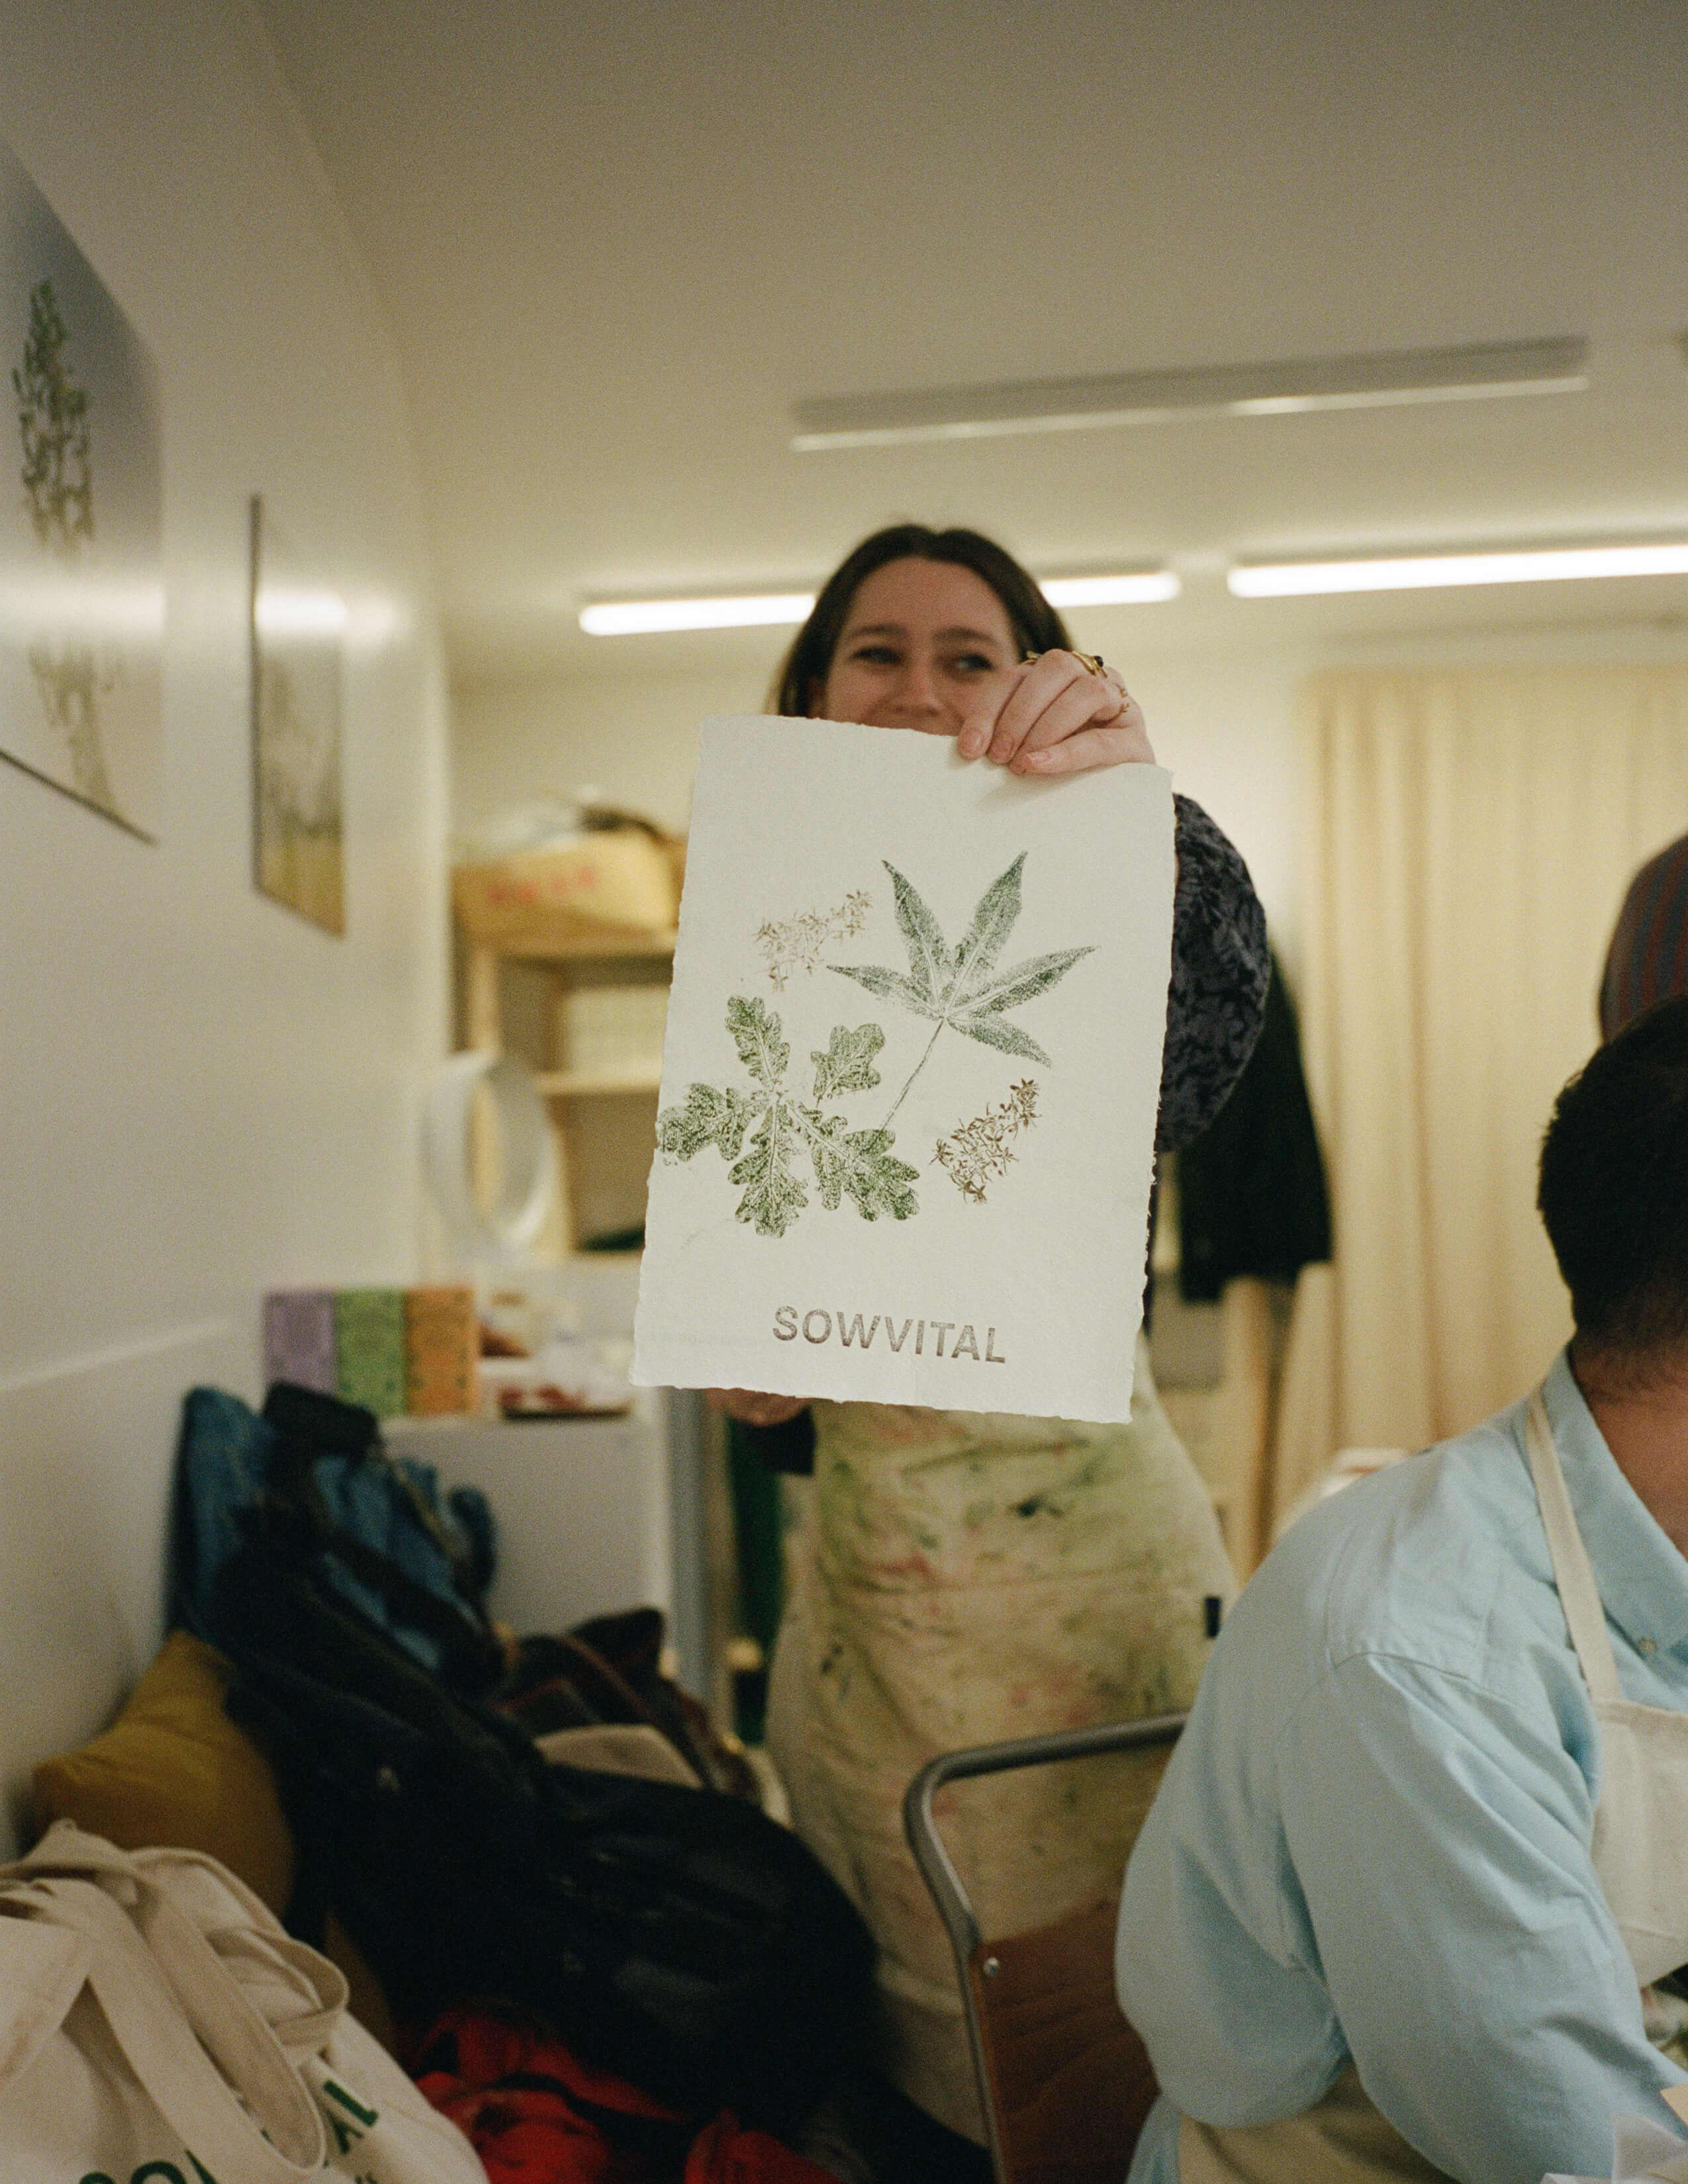 A lady showed her nature plant printing result with Sowvital’s name at the bottom of the paper in the popup shop.